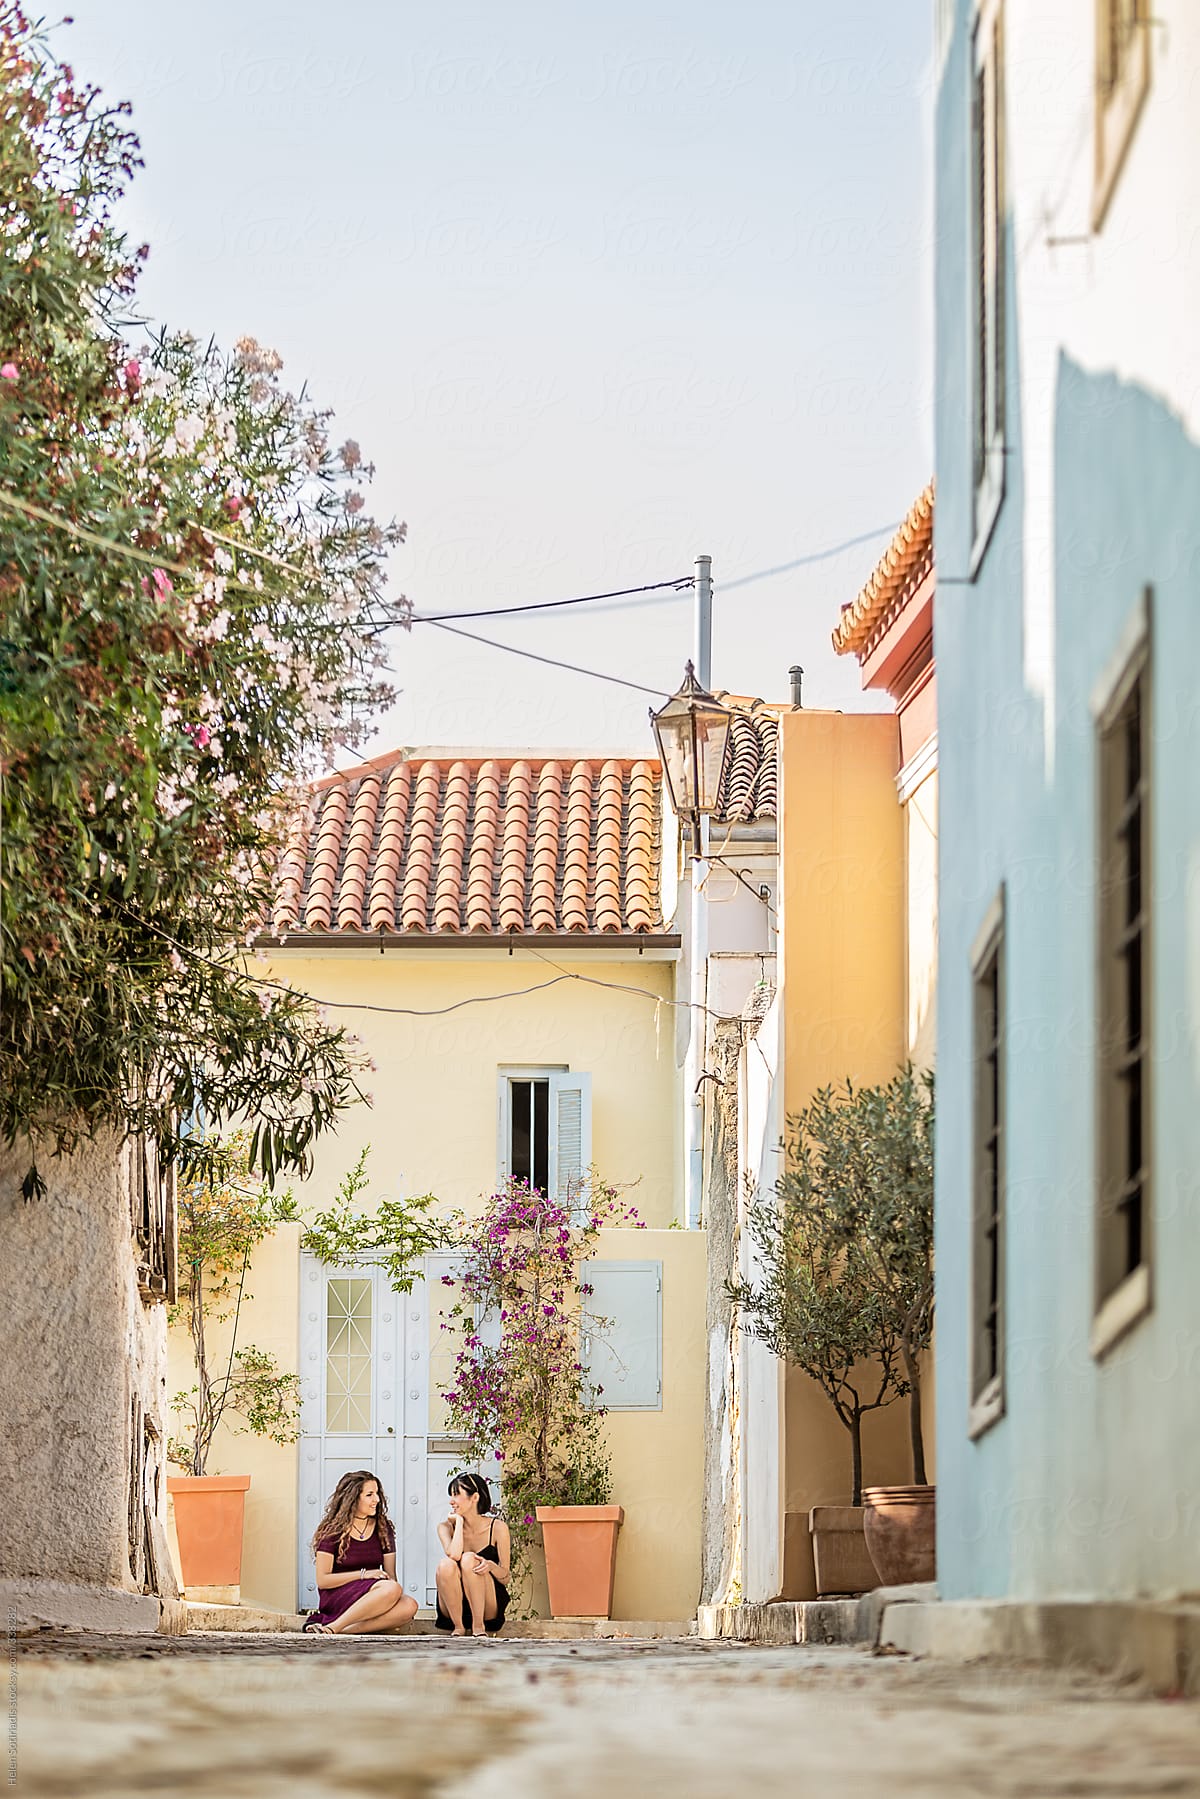 A Visit to Plaka, in Athens, Greece